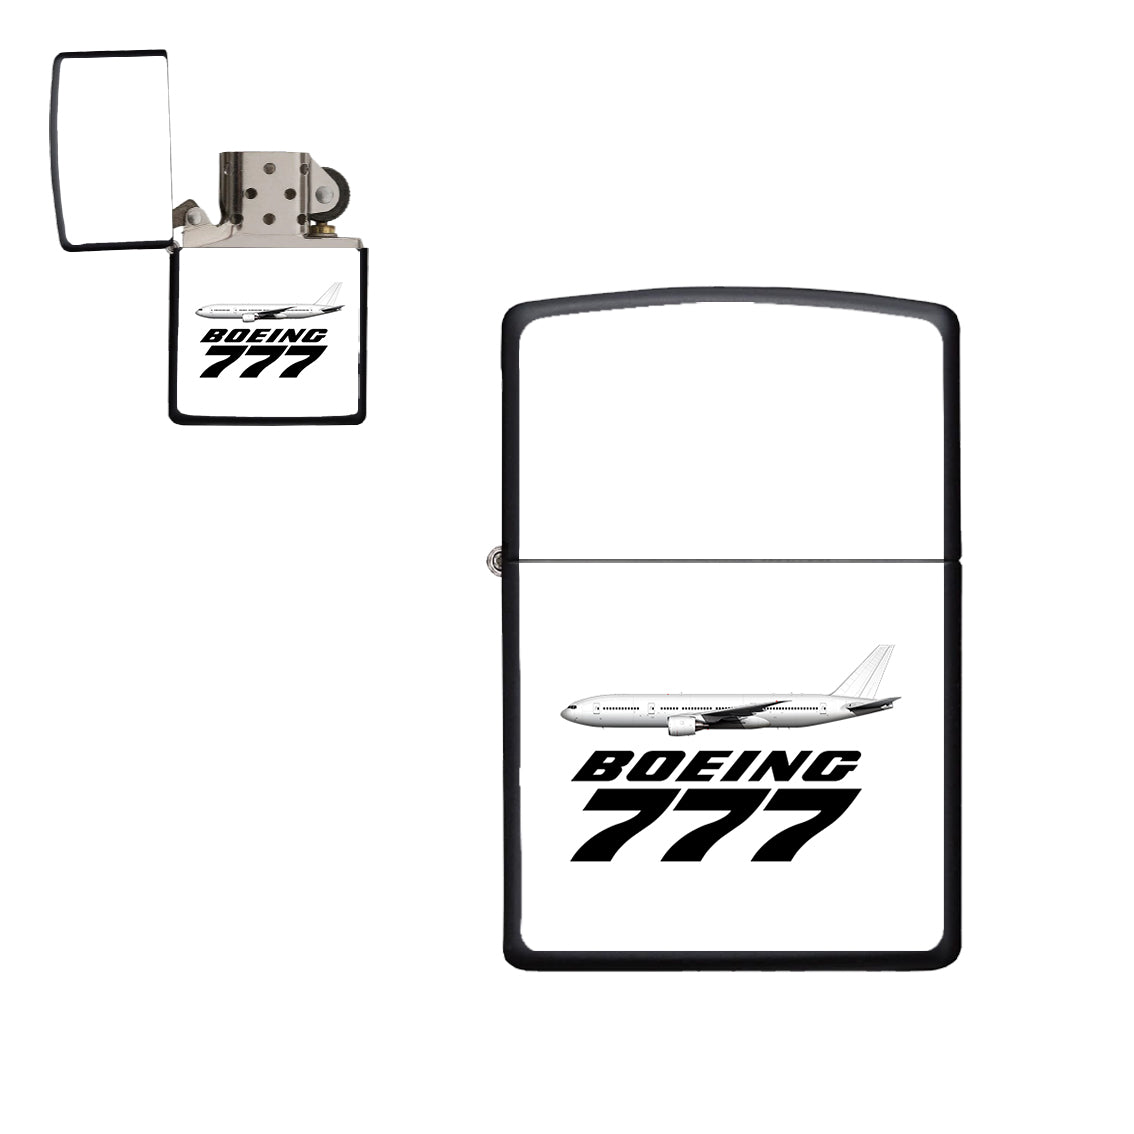 The Boeing 777 Designed Metal Lighters